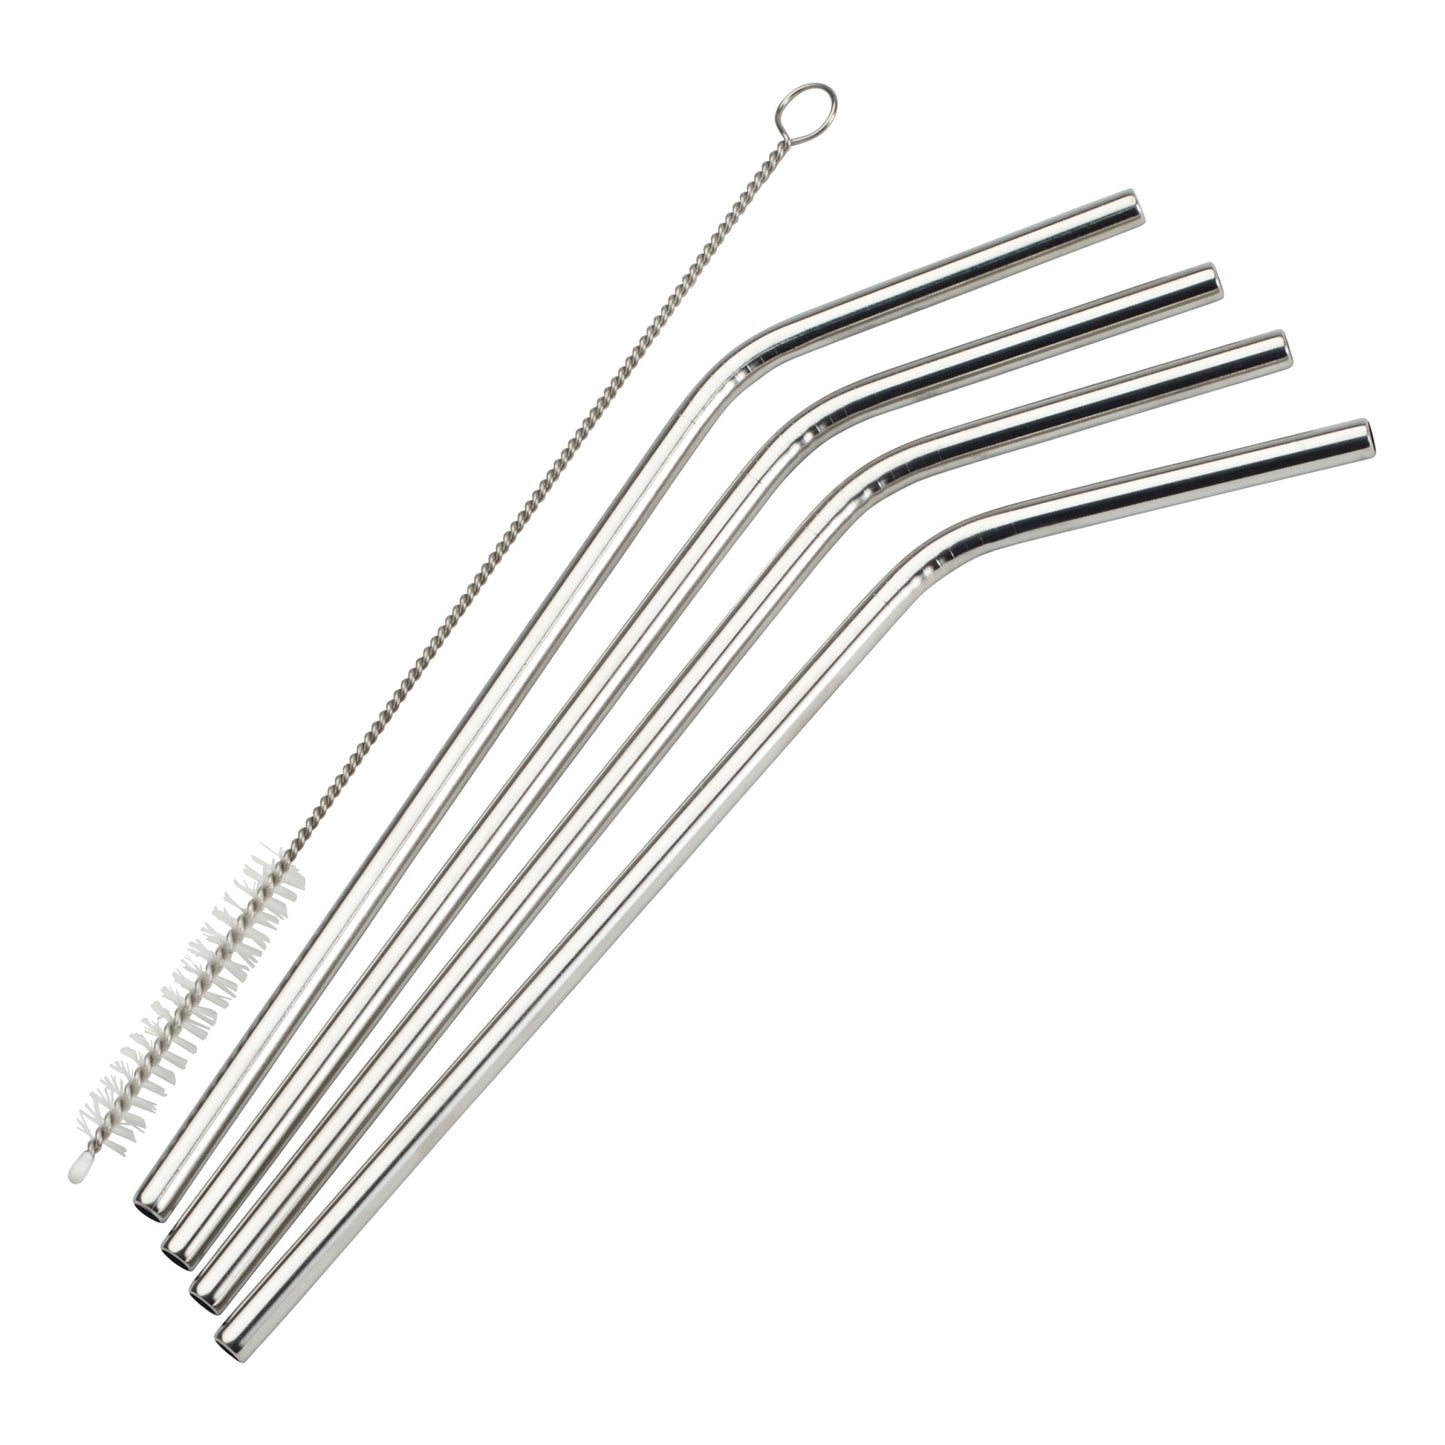 SSTW-8C - Drinking Straws, 18/8 Stainless Steel - Curved